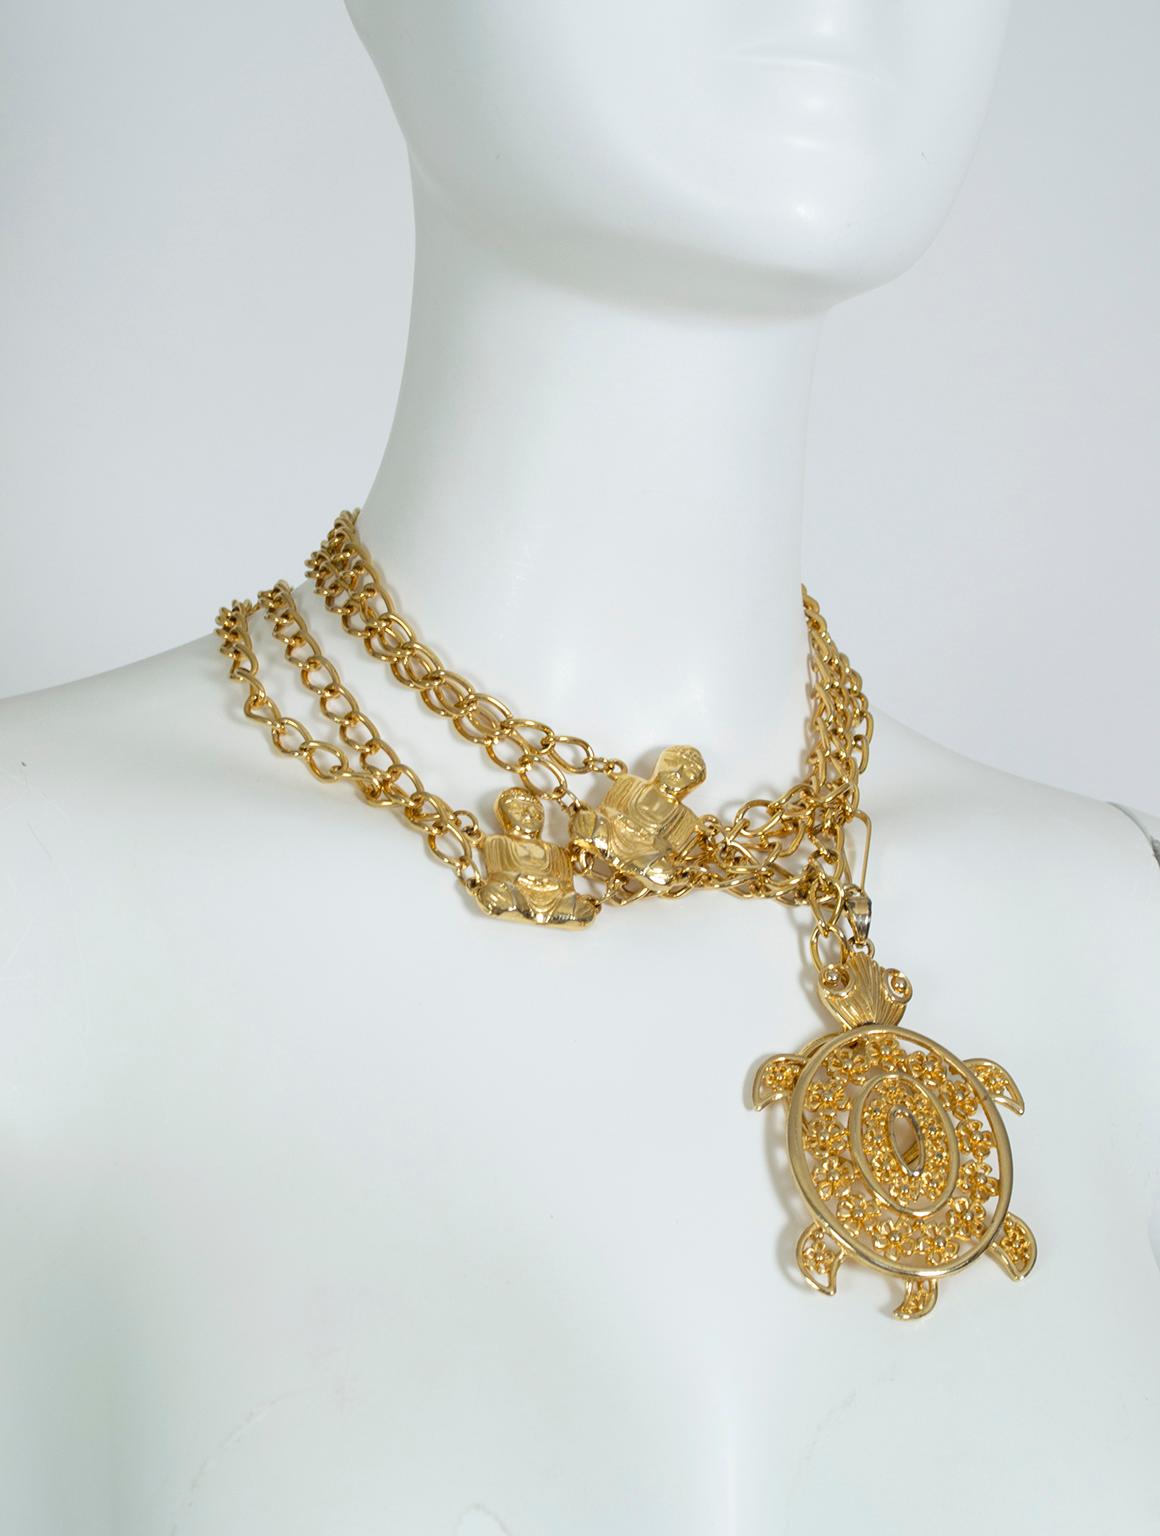 “Golden Turtle” Buddhist Chain Belt with Dangling Turtle Talisman – O/S, 1980s 1